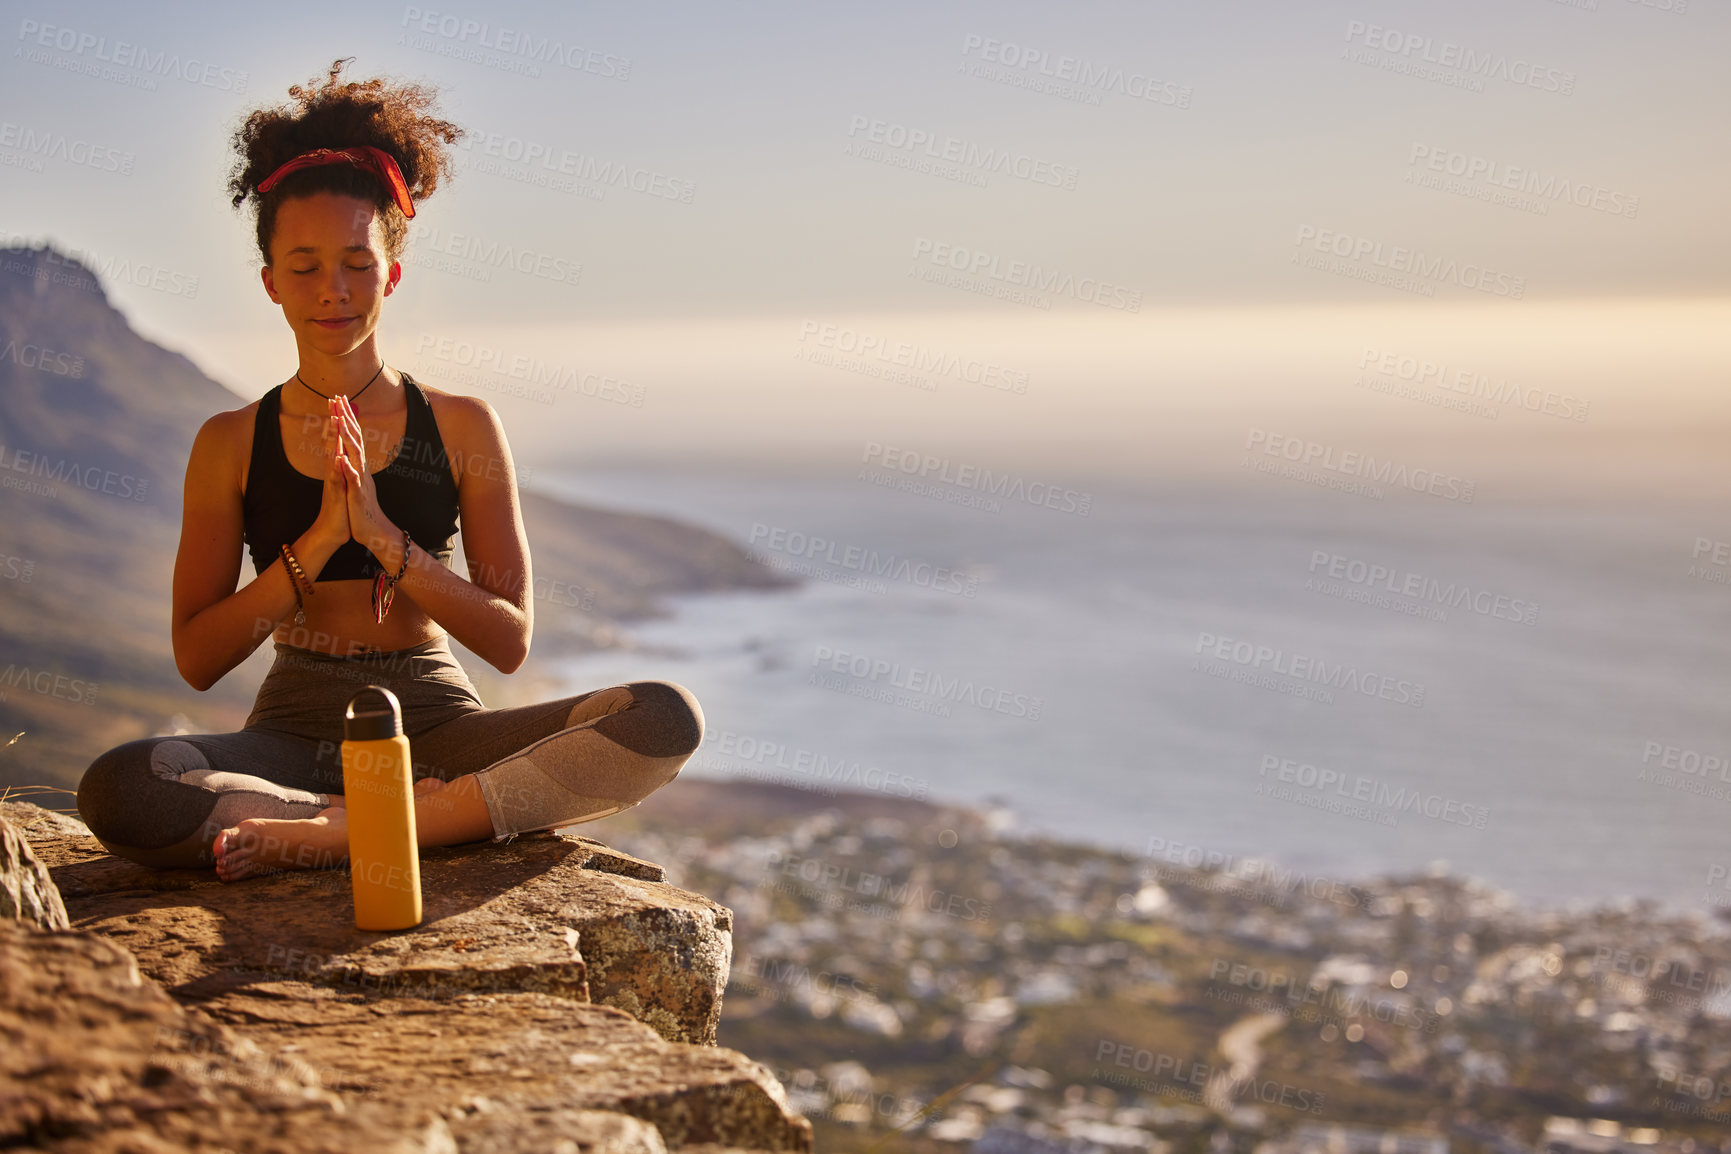 Buy stock photo Shot of a young woman meditating while sitting on a mountain cliff